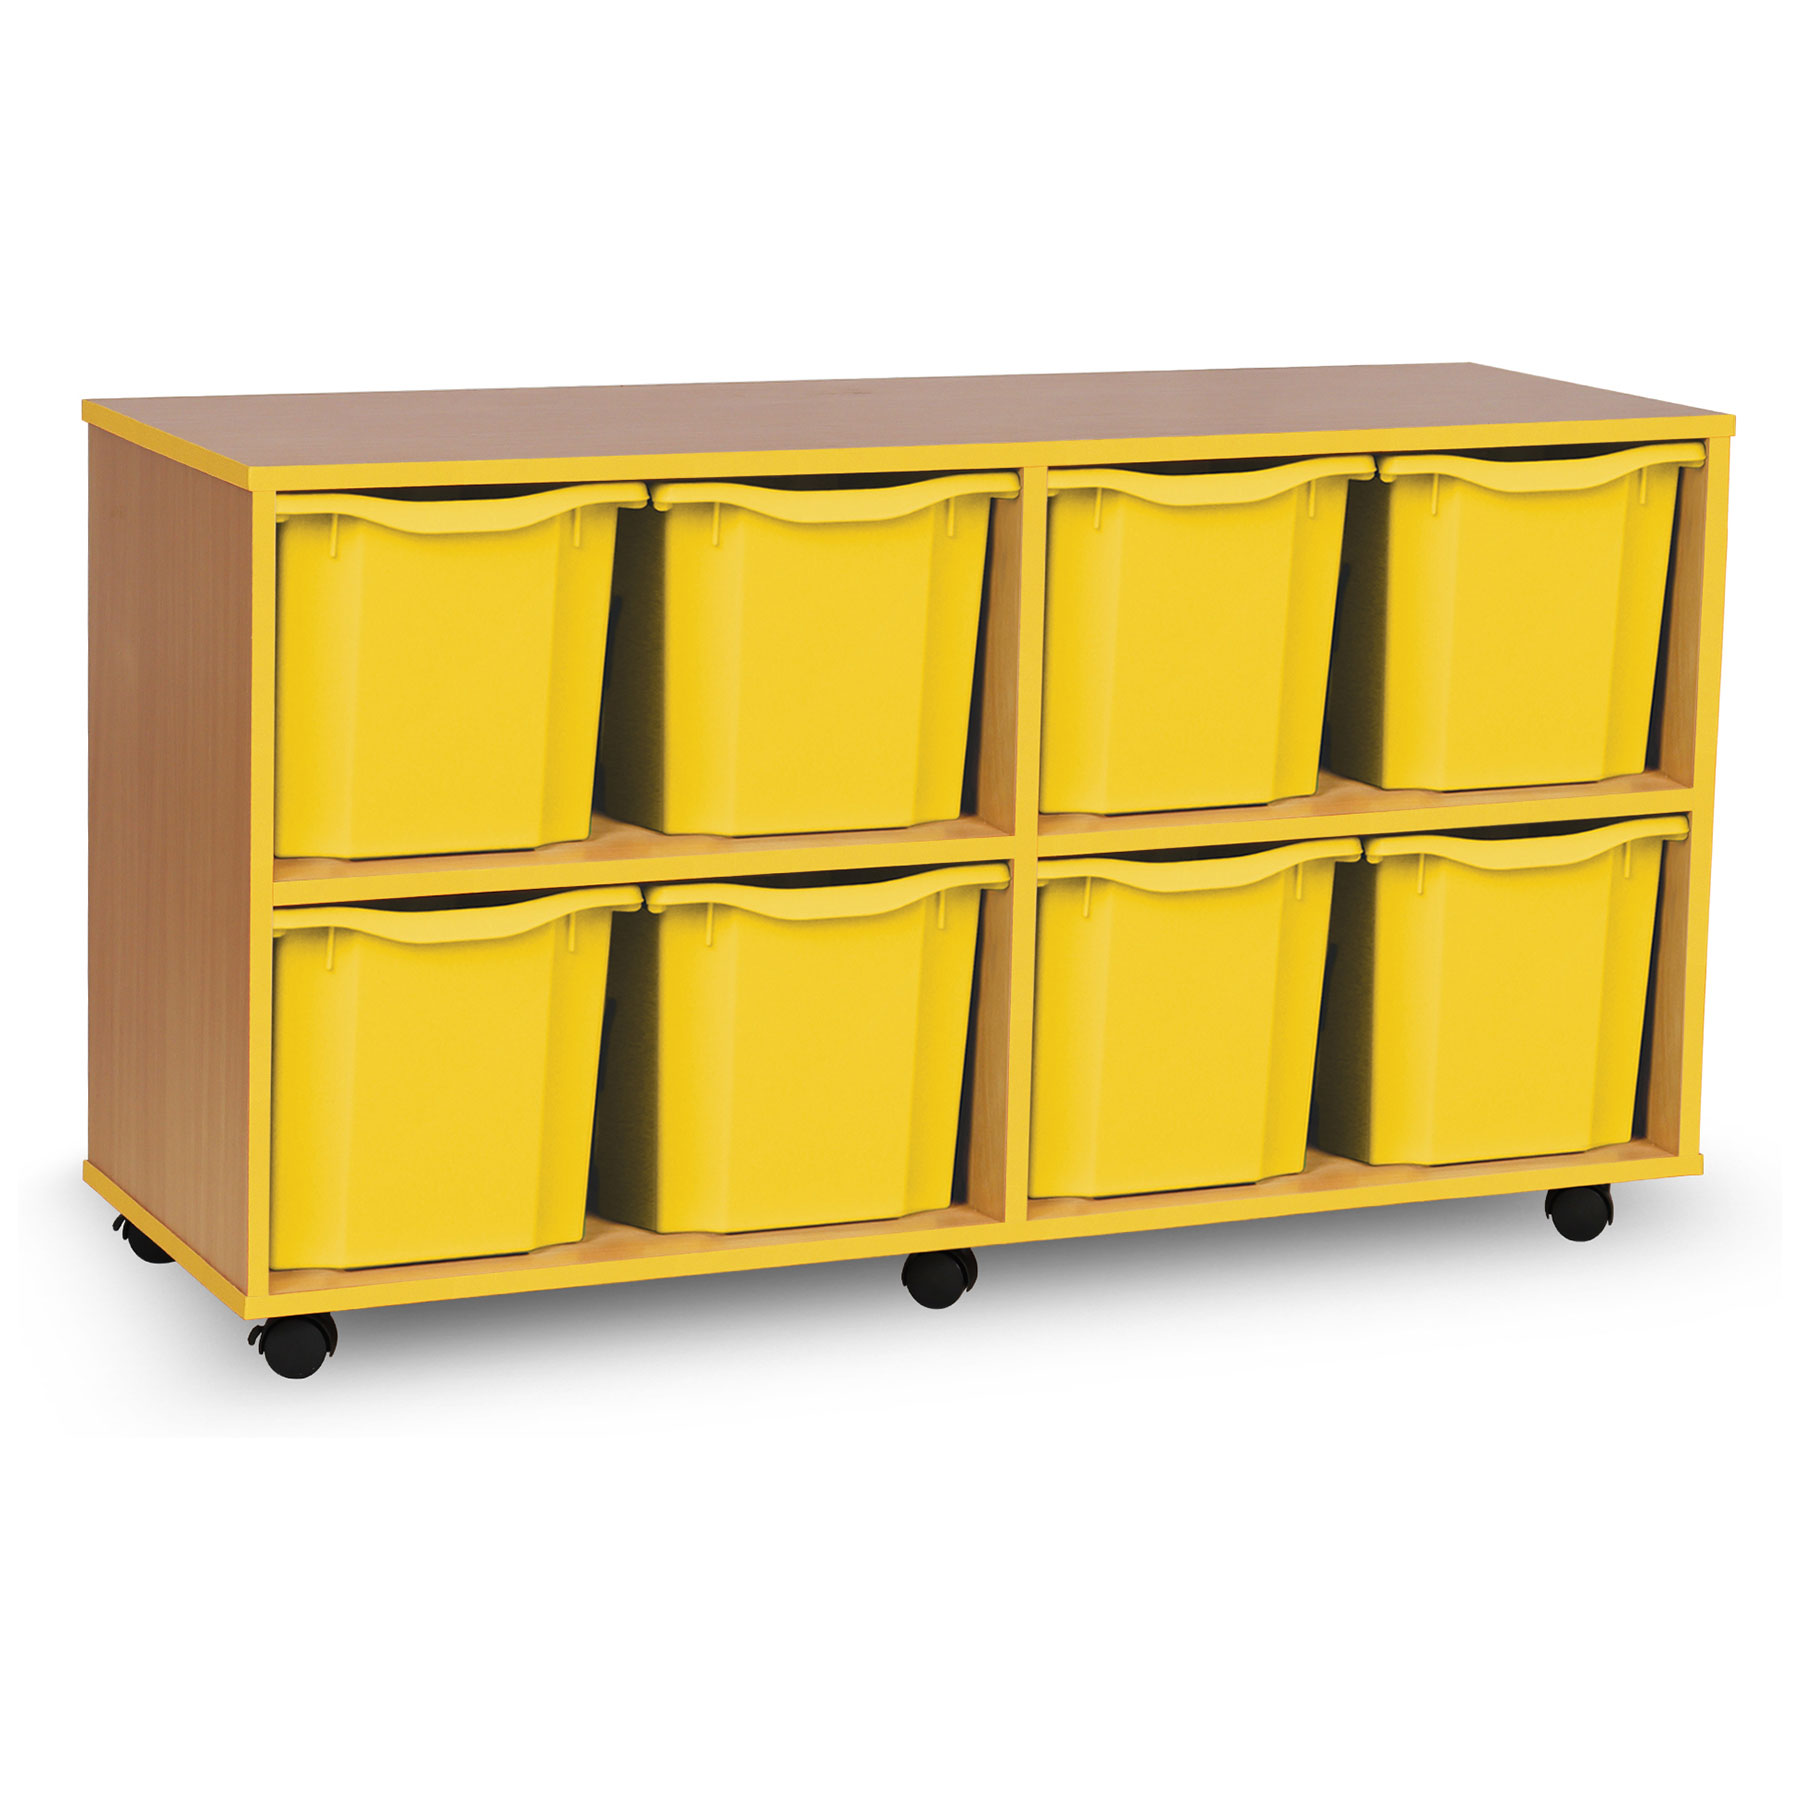 8 Quad Tray Unit with Yellow Edging, Castors & Yellow Trays